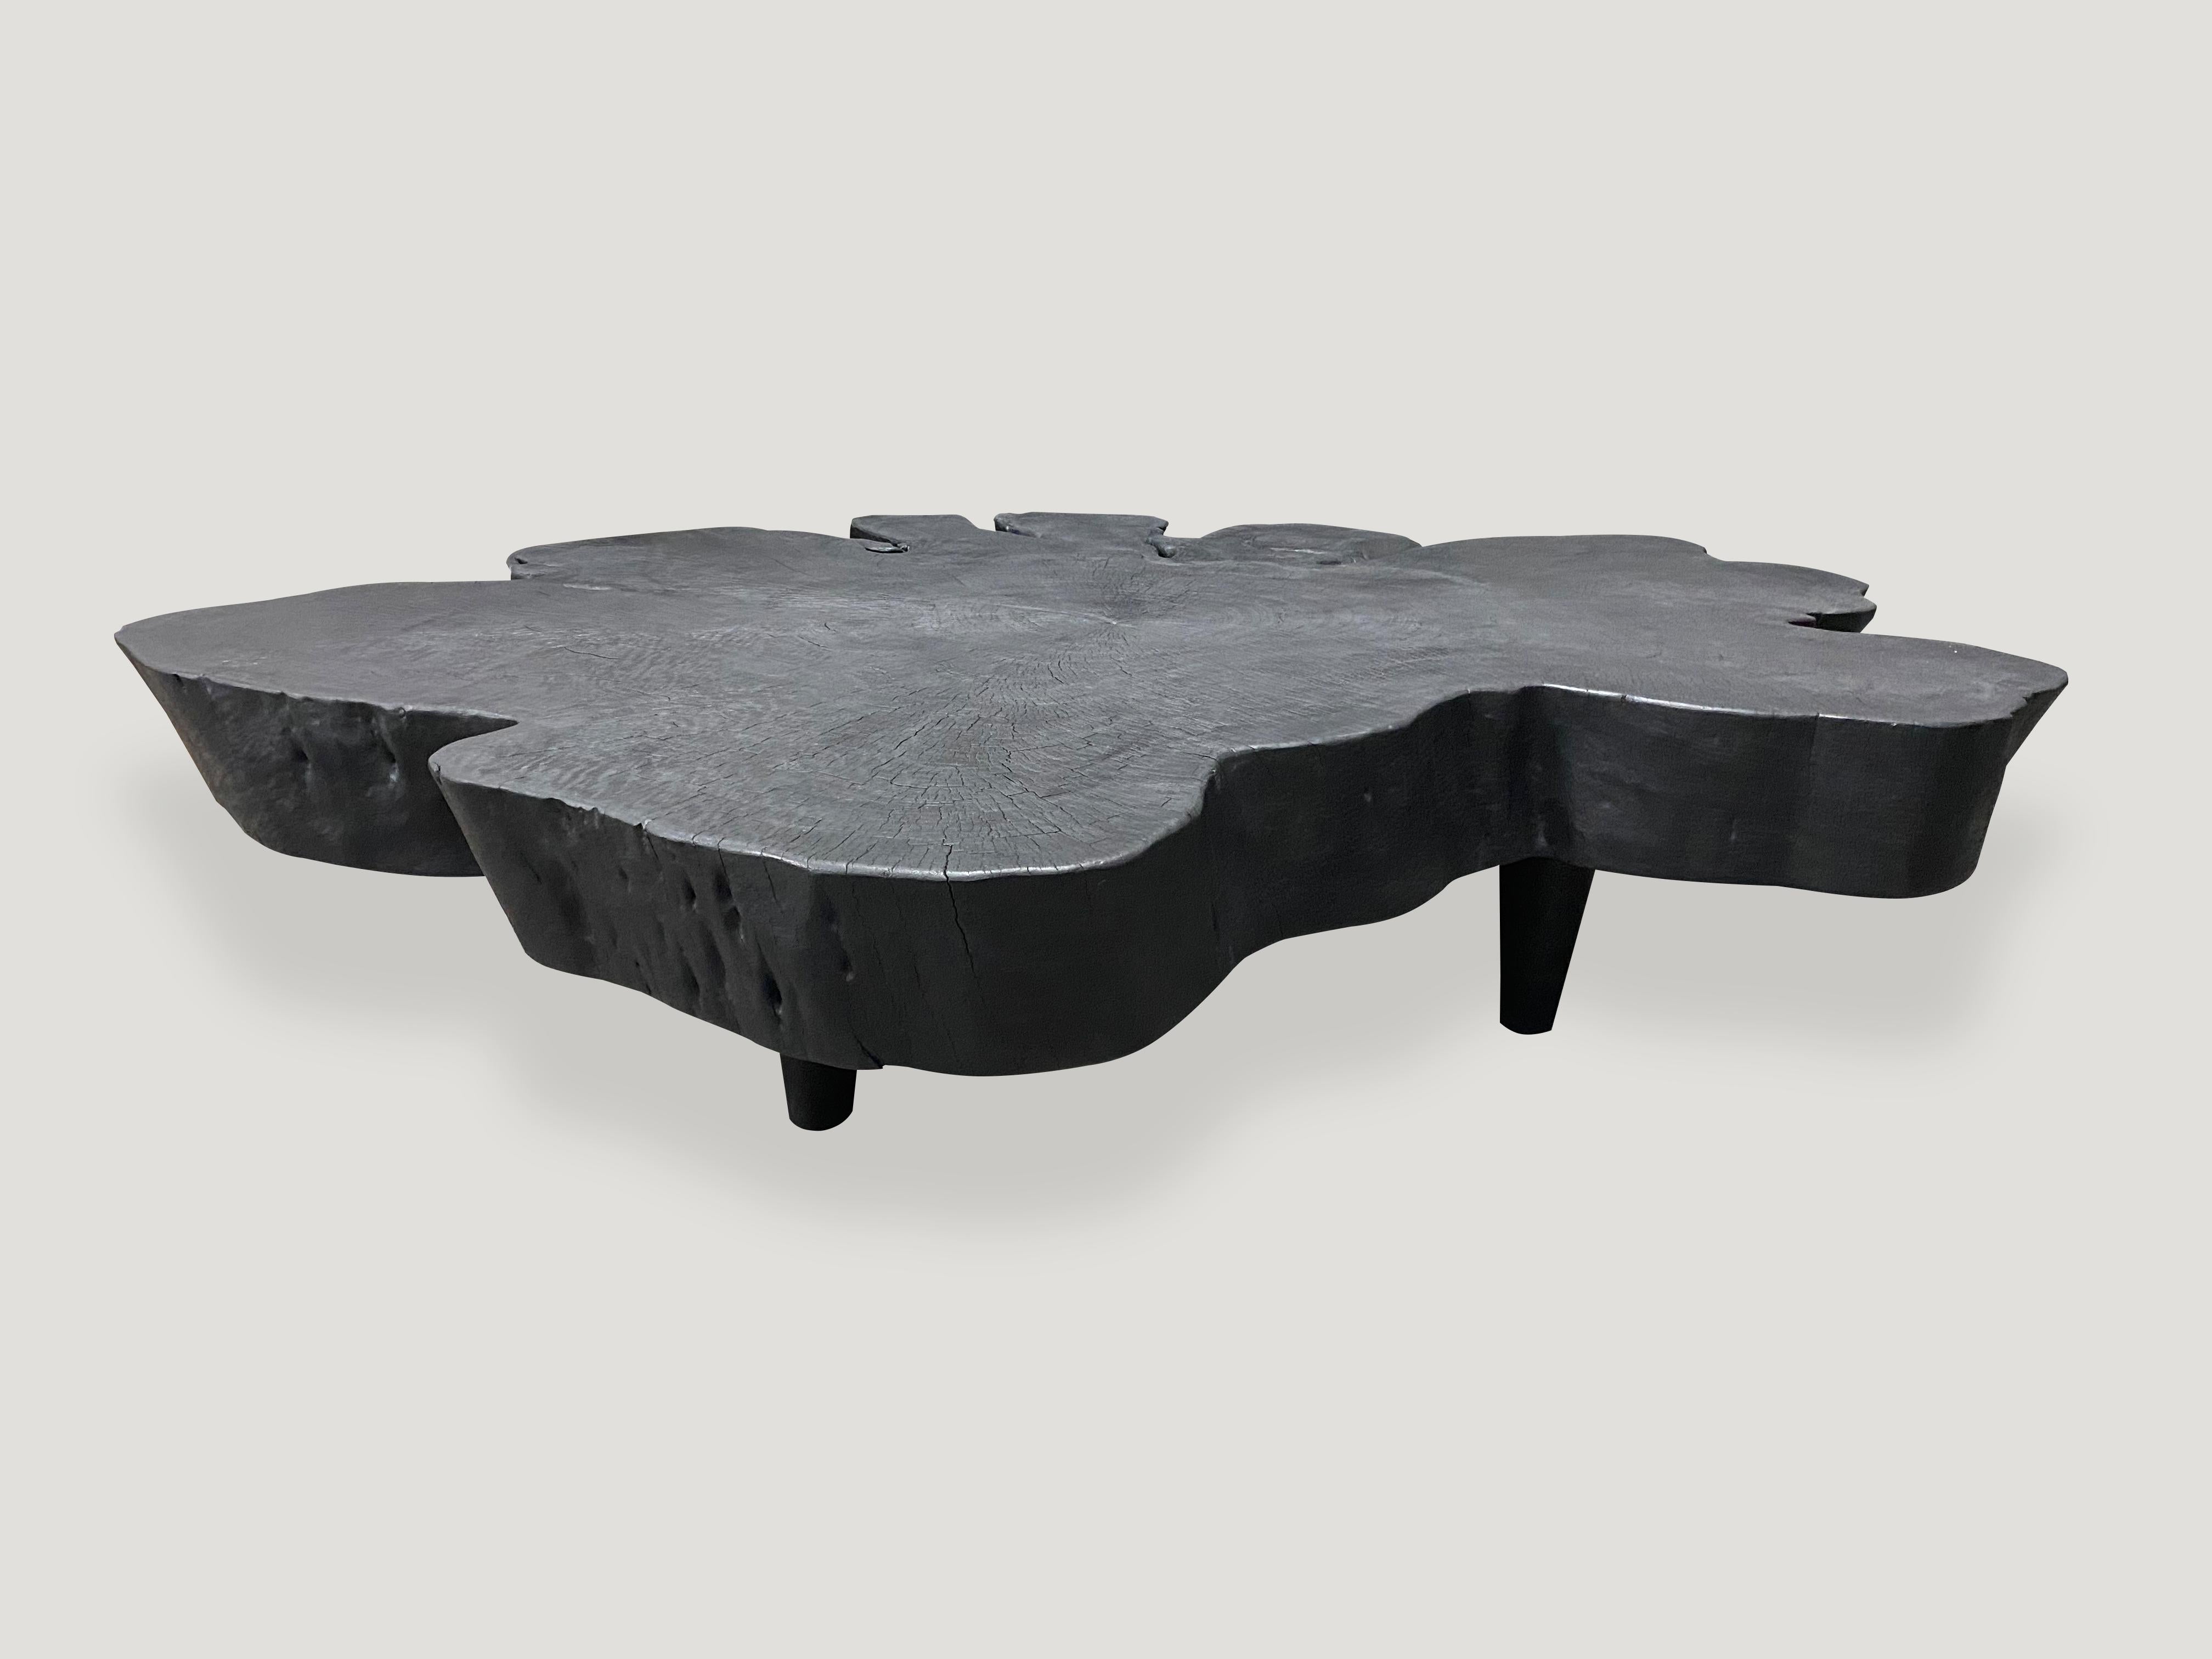 Impressive reclaimed mango wood coffee table made from a six inch single slab. The top floats off the floor on midcentury style cone shaped legs. Charred, sanded and sealed exposing the beautiful grain of the wood.

The Triple Burnt collection